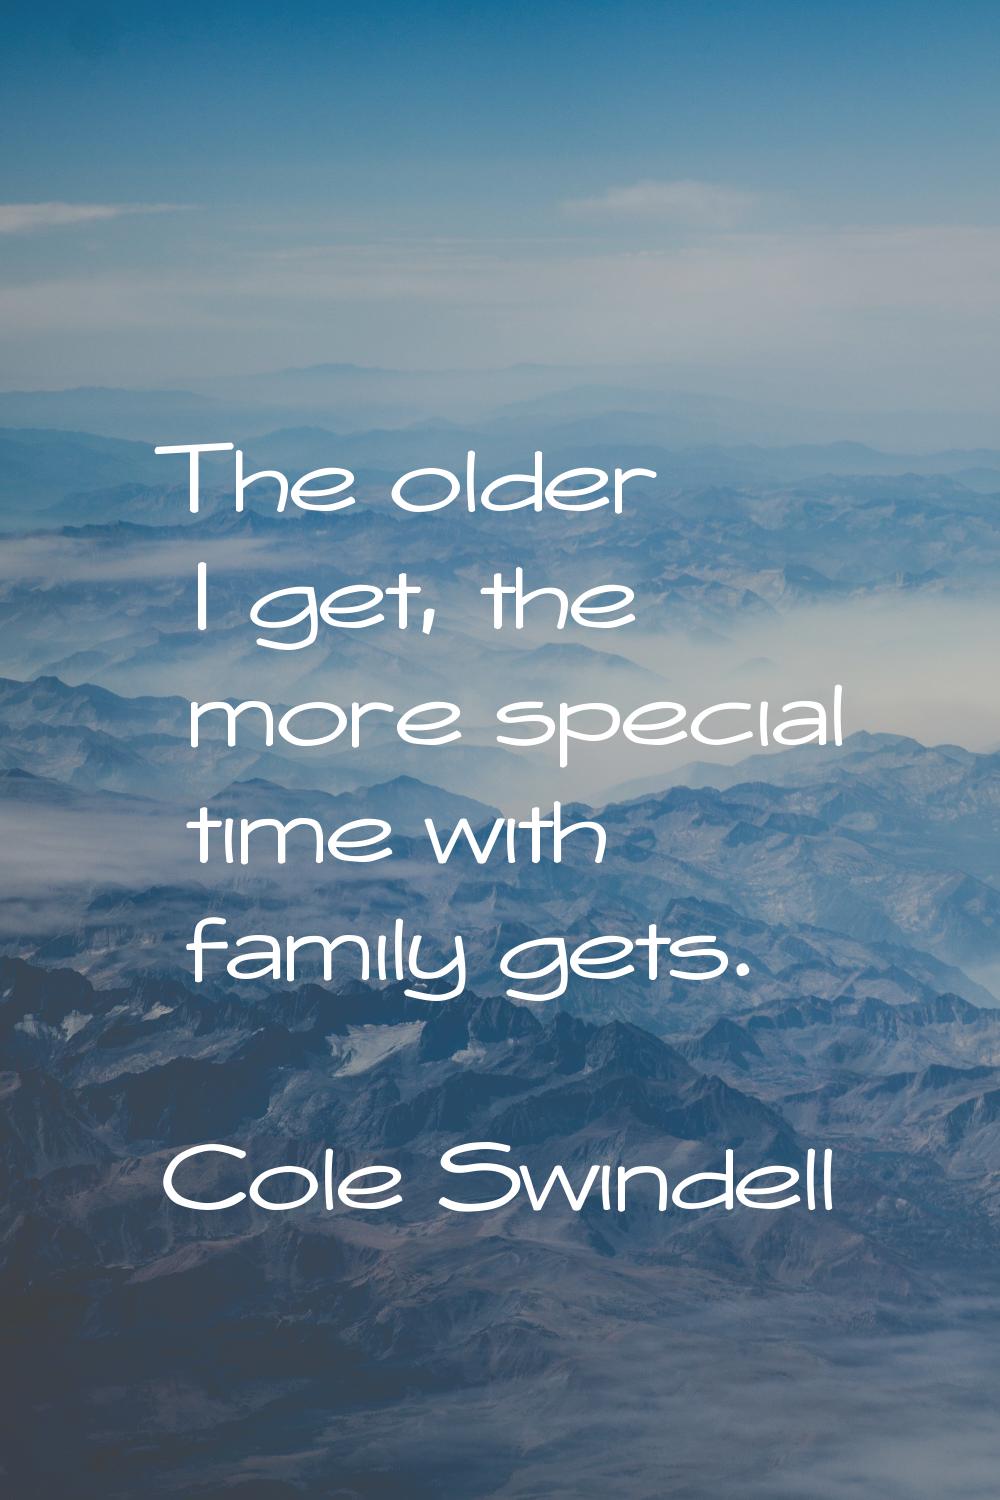 The older I get, the more special time with family gets.